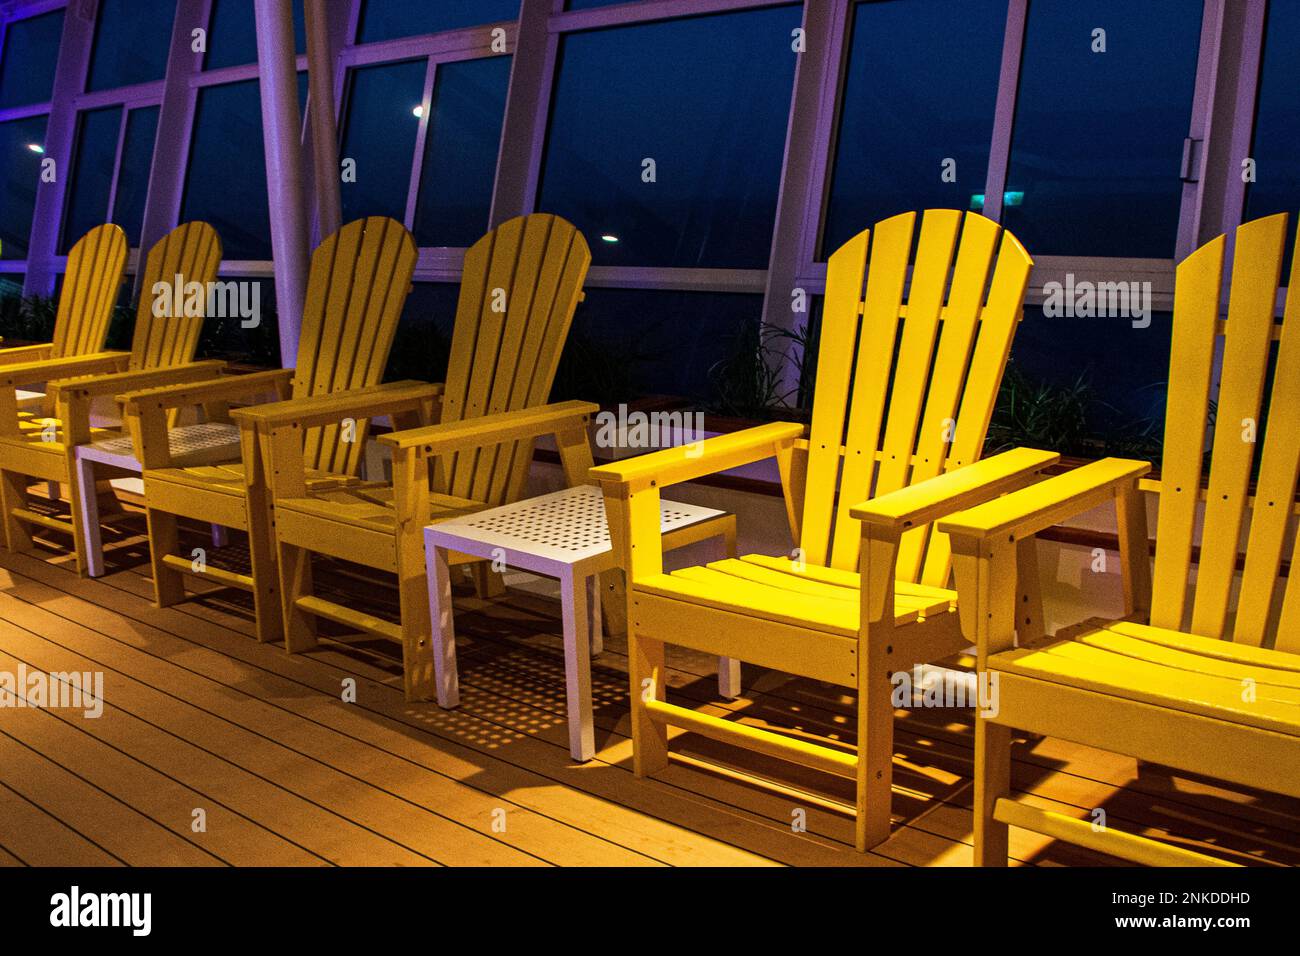 A row of yellow deck chairs at night aboard the Allure of the Seas, Royal Caribbean cruise lines. Stock Photo